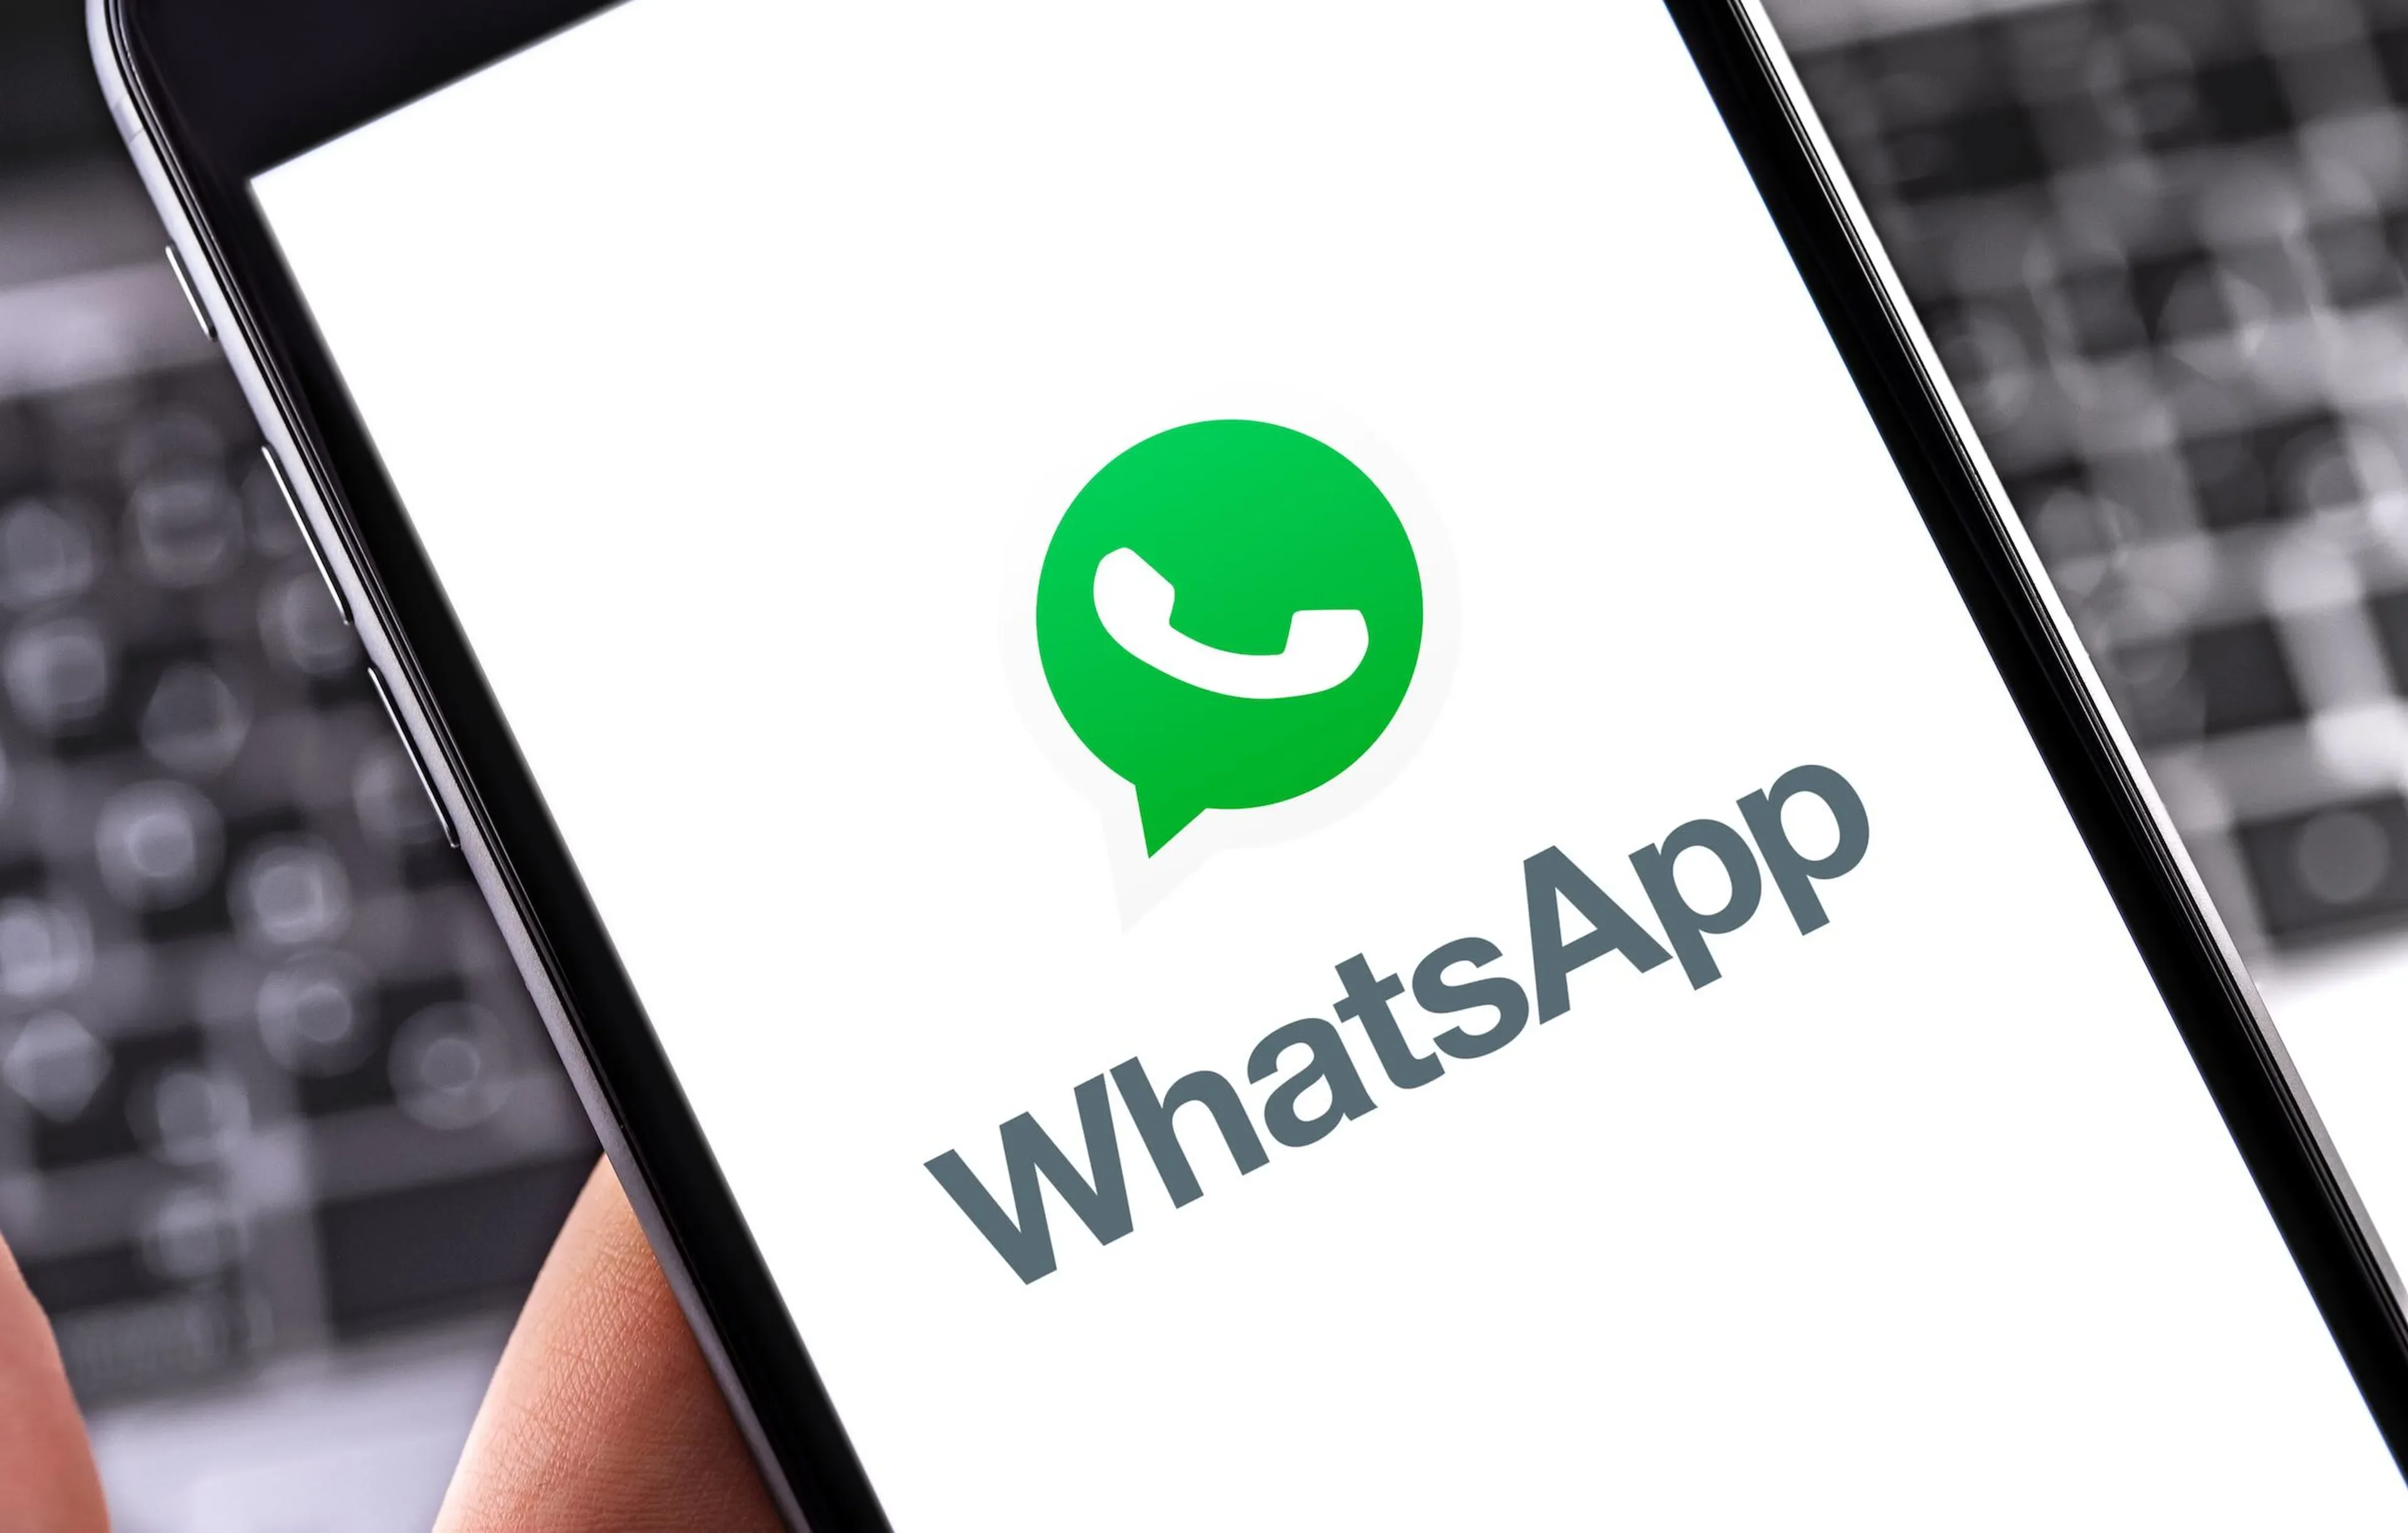 WhatsApp will get two new features